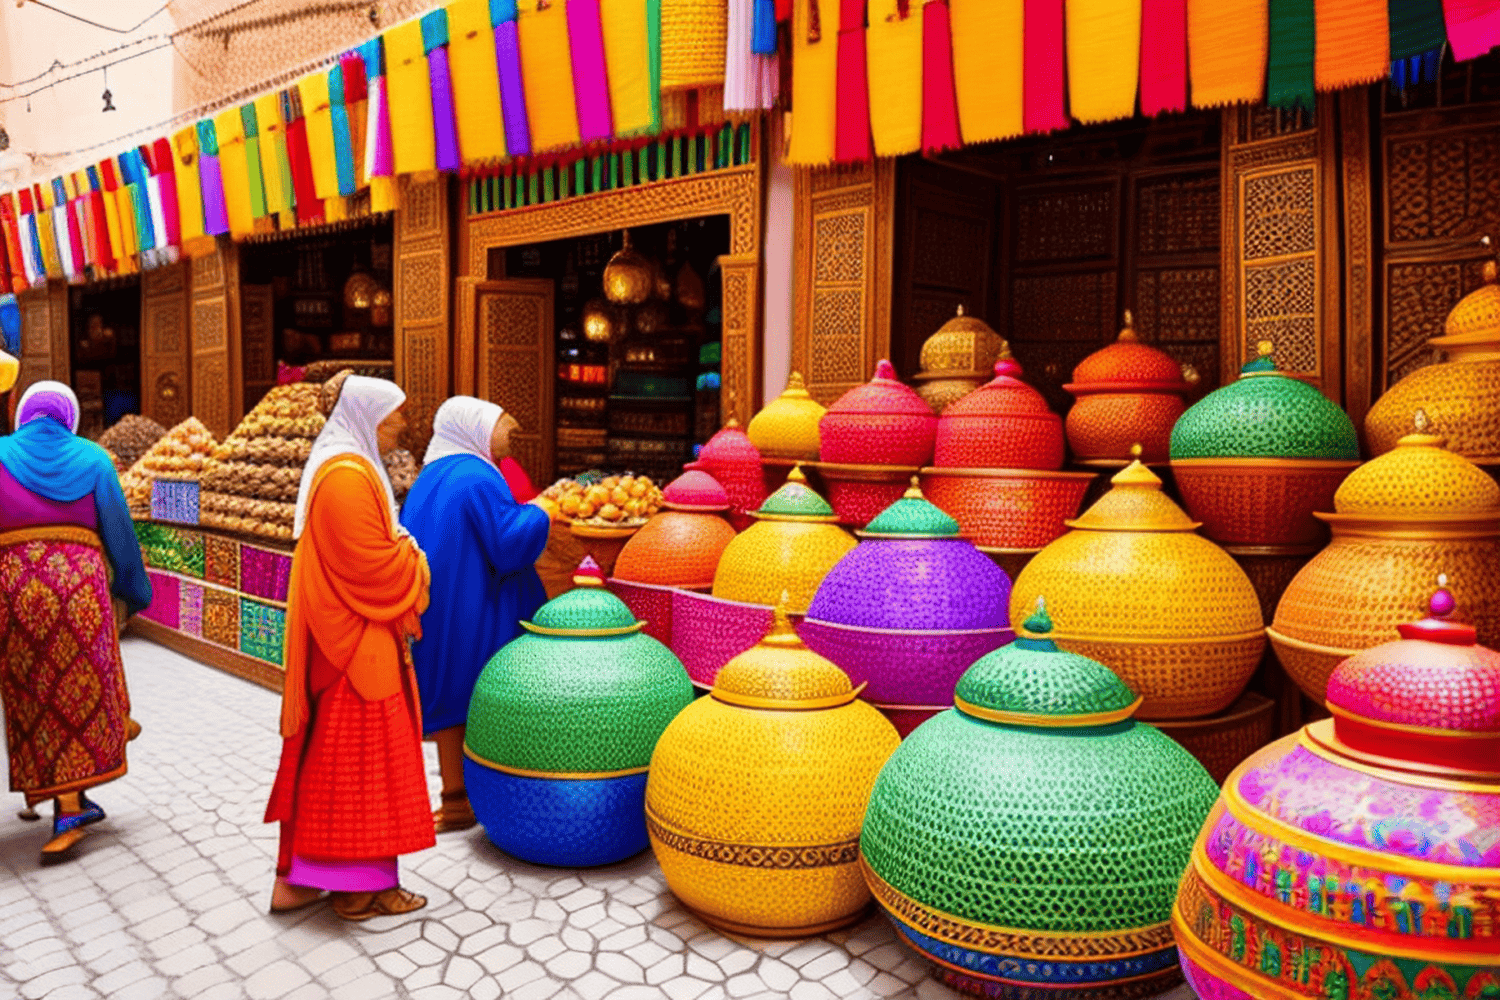 Information about Morocco